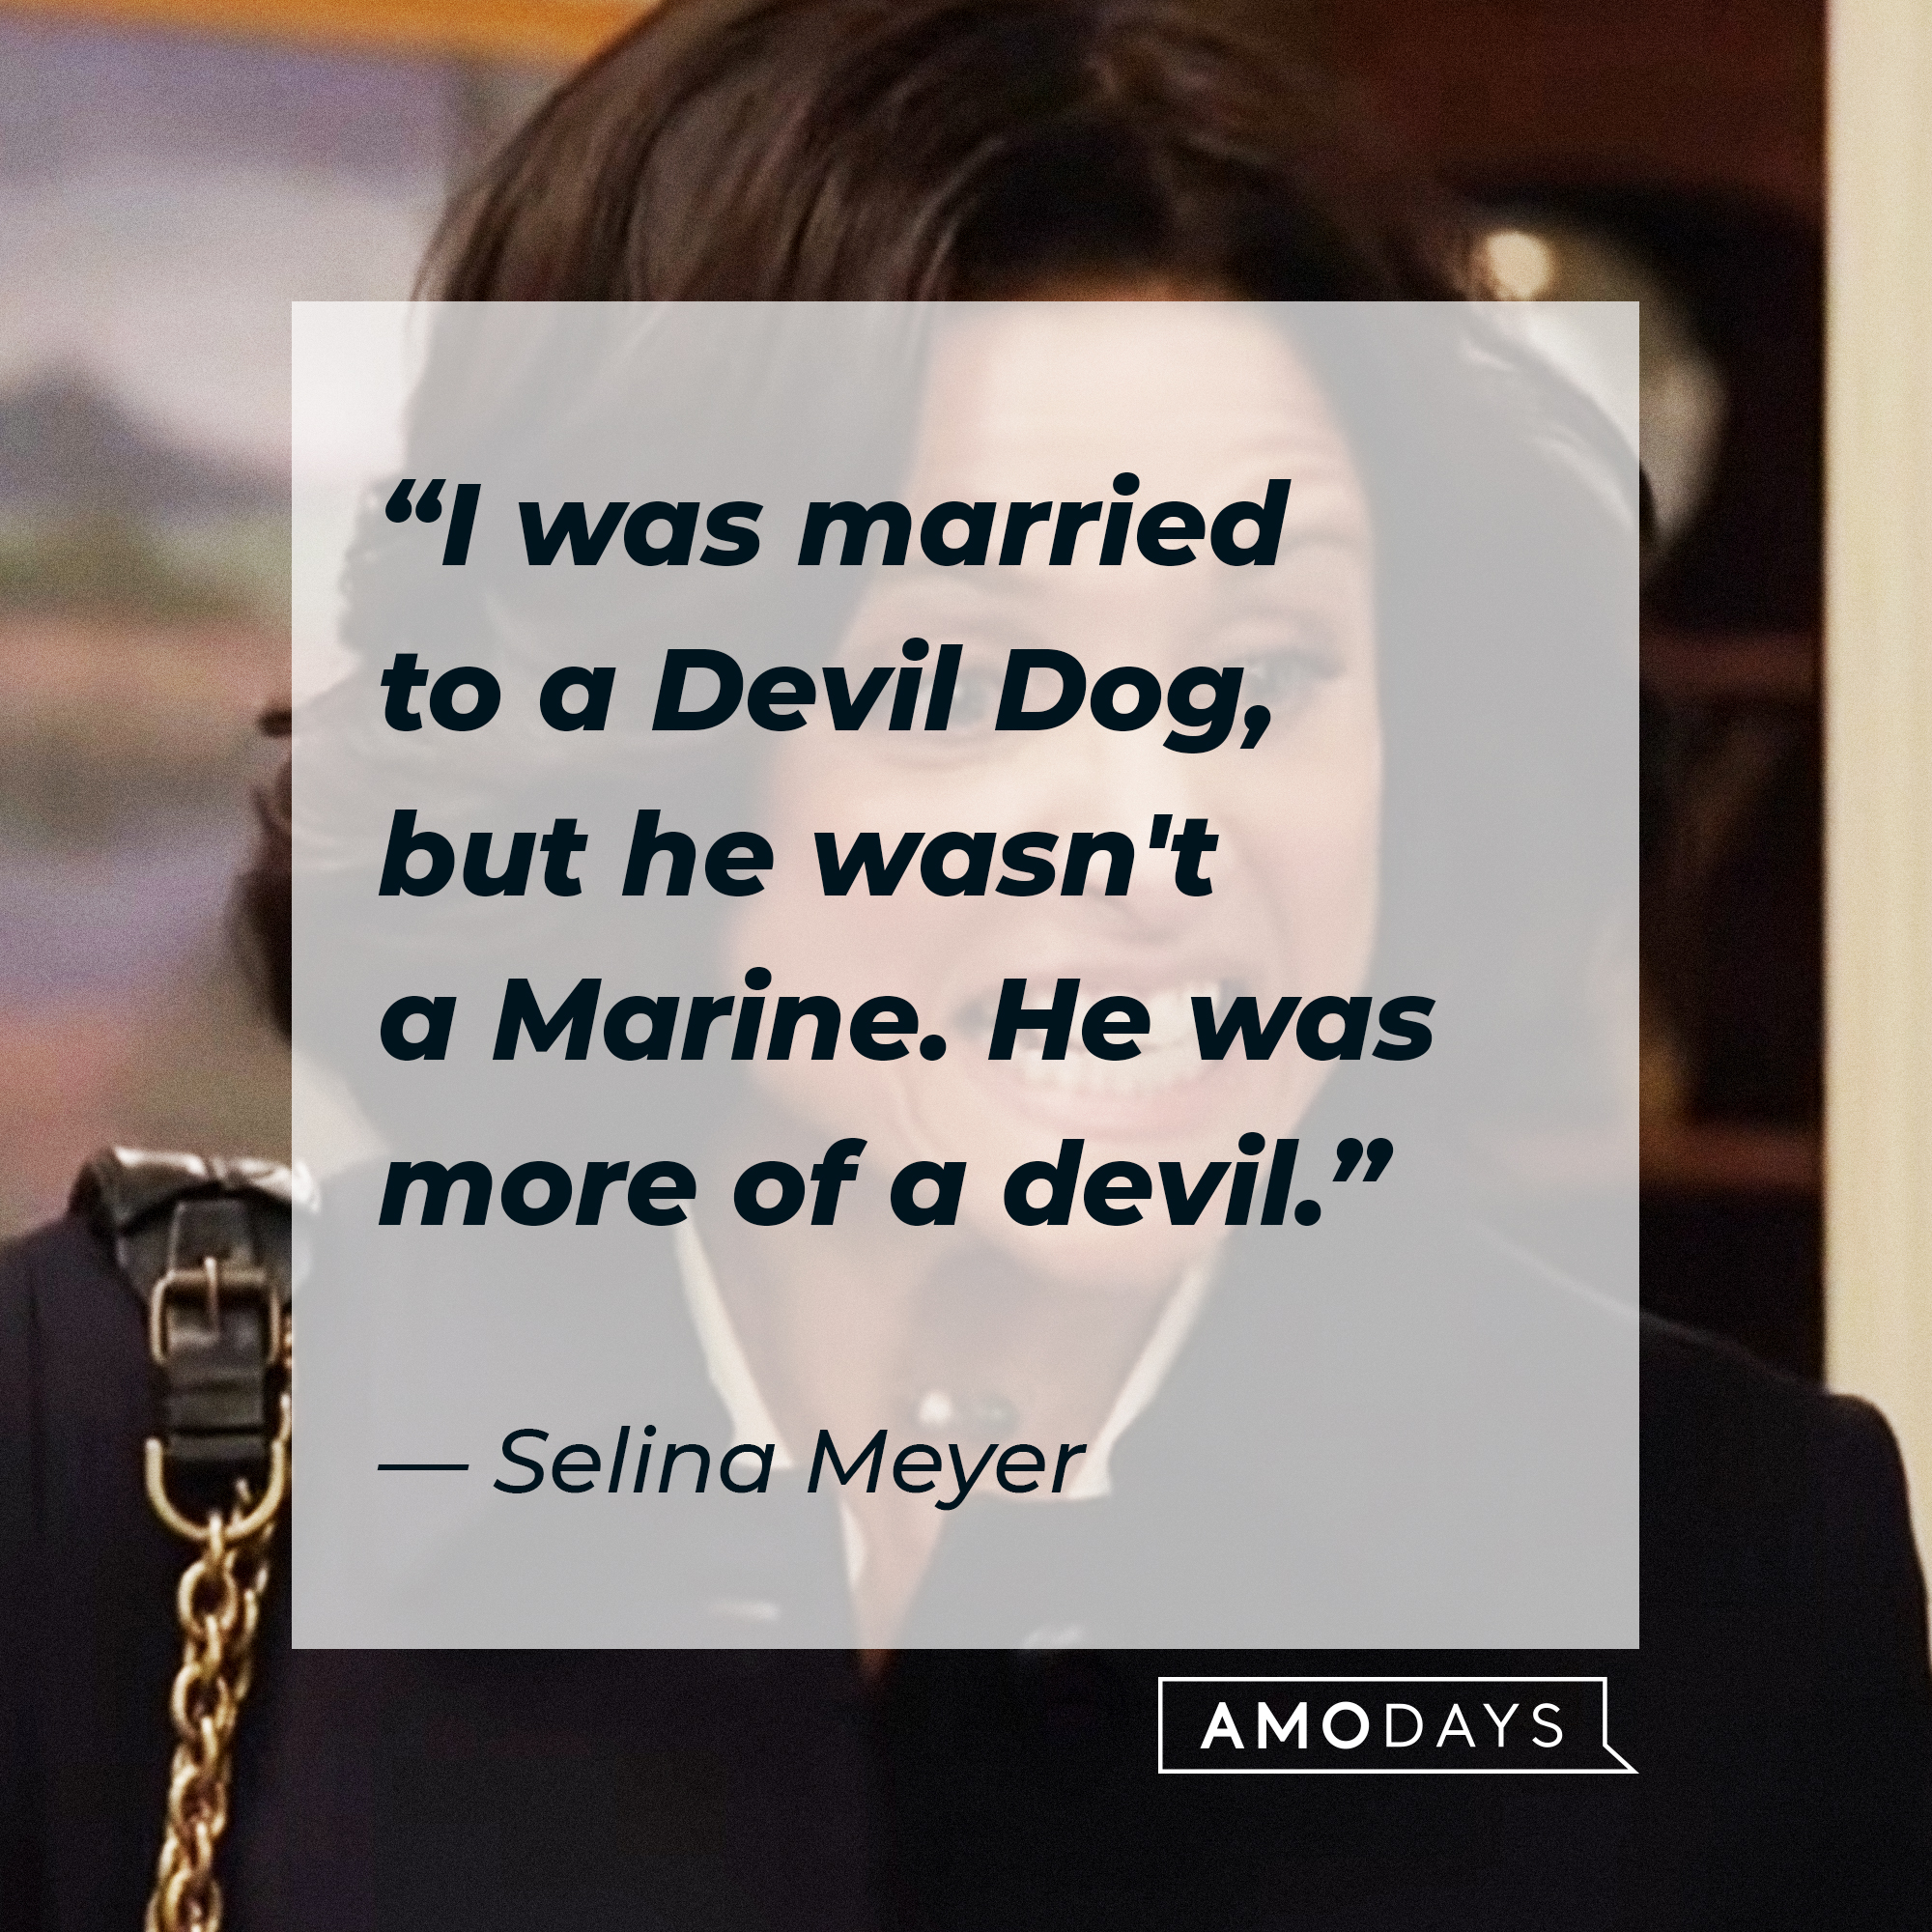 Selina Meyer, with her quote: “I was married to a Devil Dog, but he wasn't a Marine. He was more of a devil.”│Source: youtube.com / Max